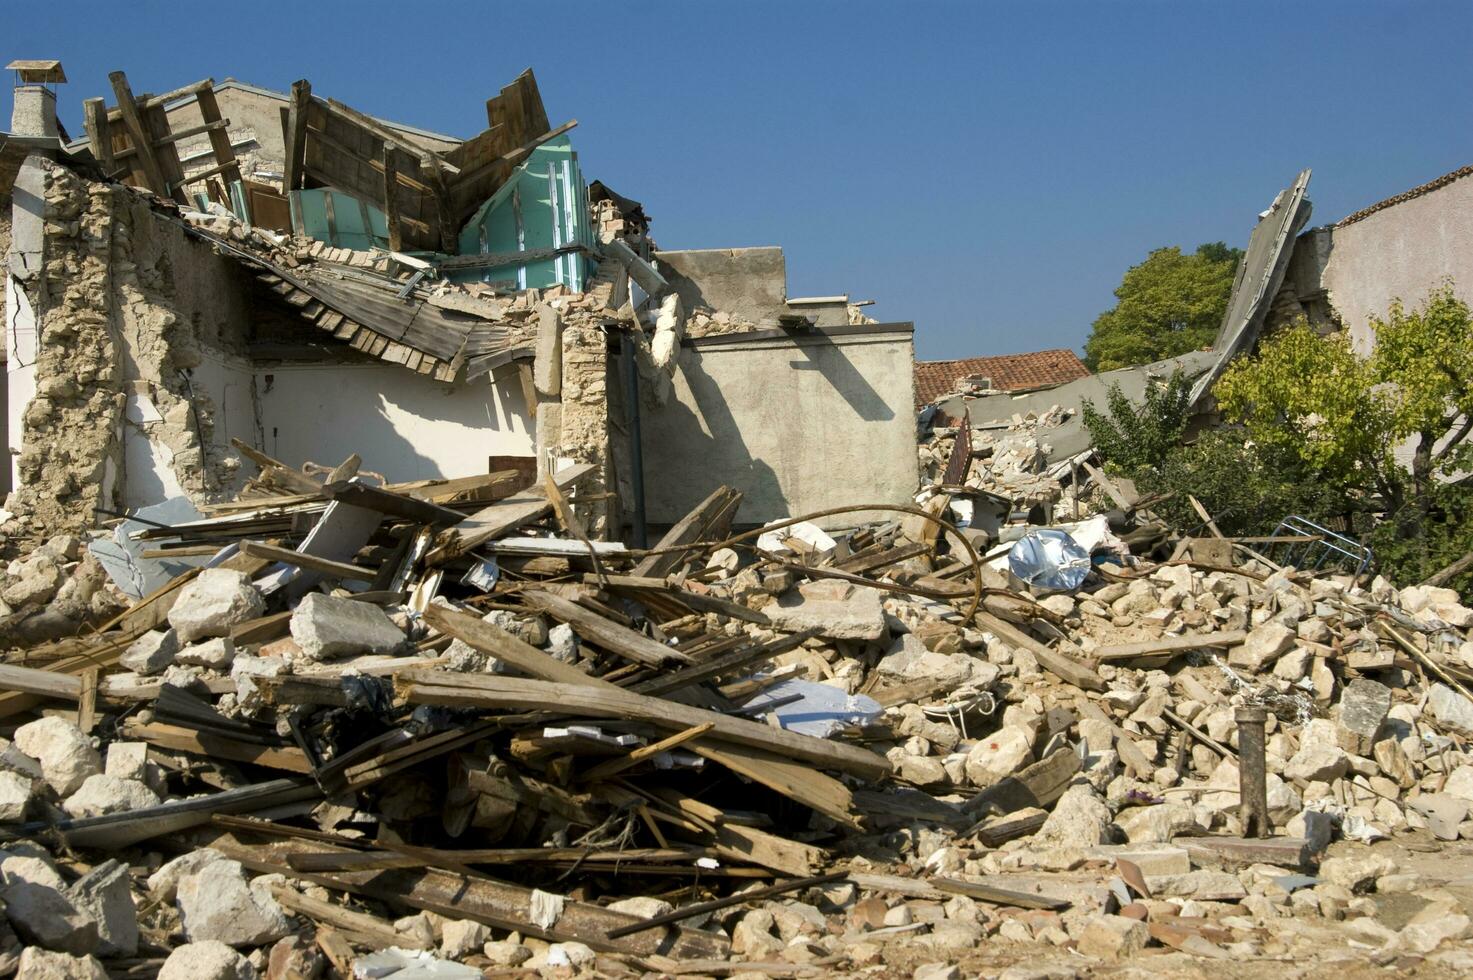 photographic documentation of the devastating earthquake in central Italy photo